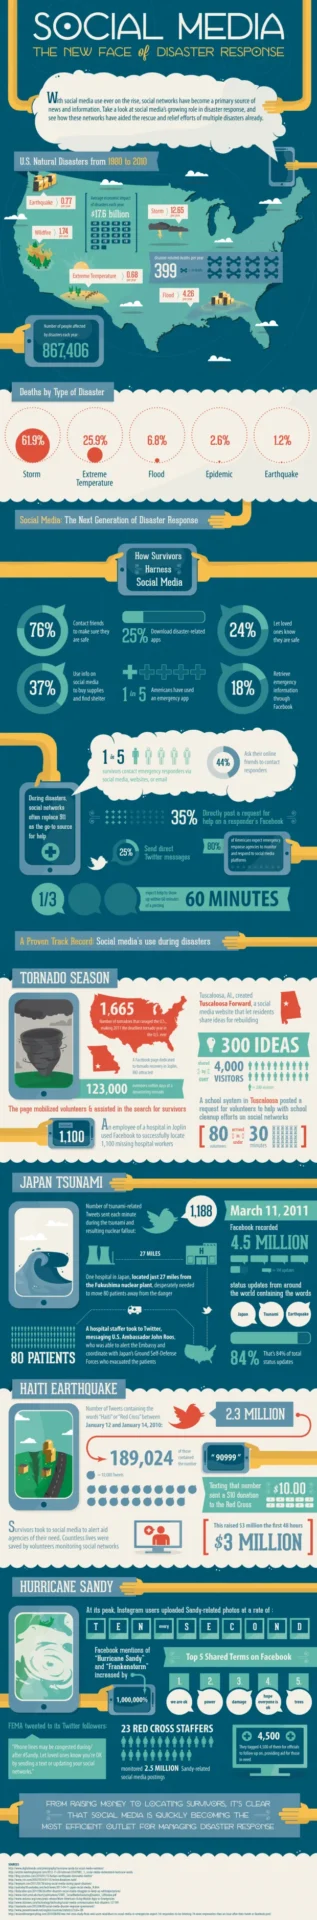 Social Media in Disaster Response Infographic by the University of San Francisco.